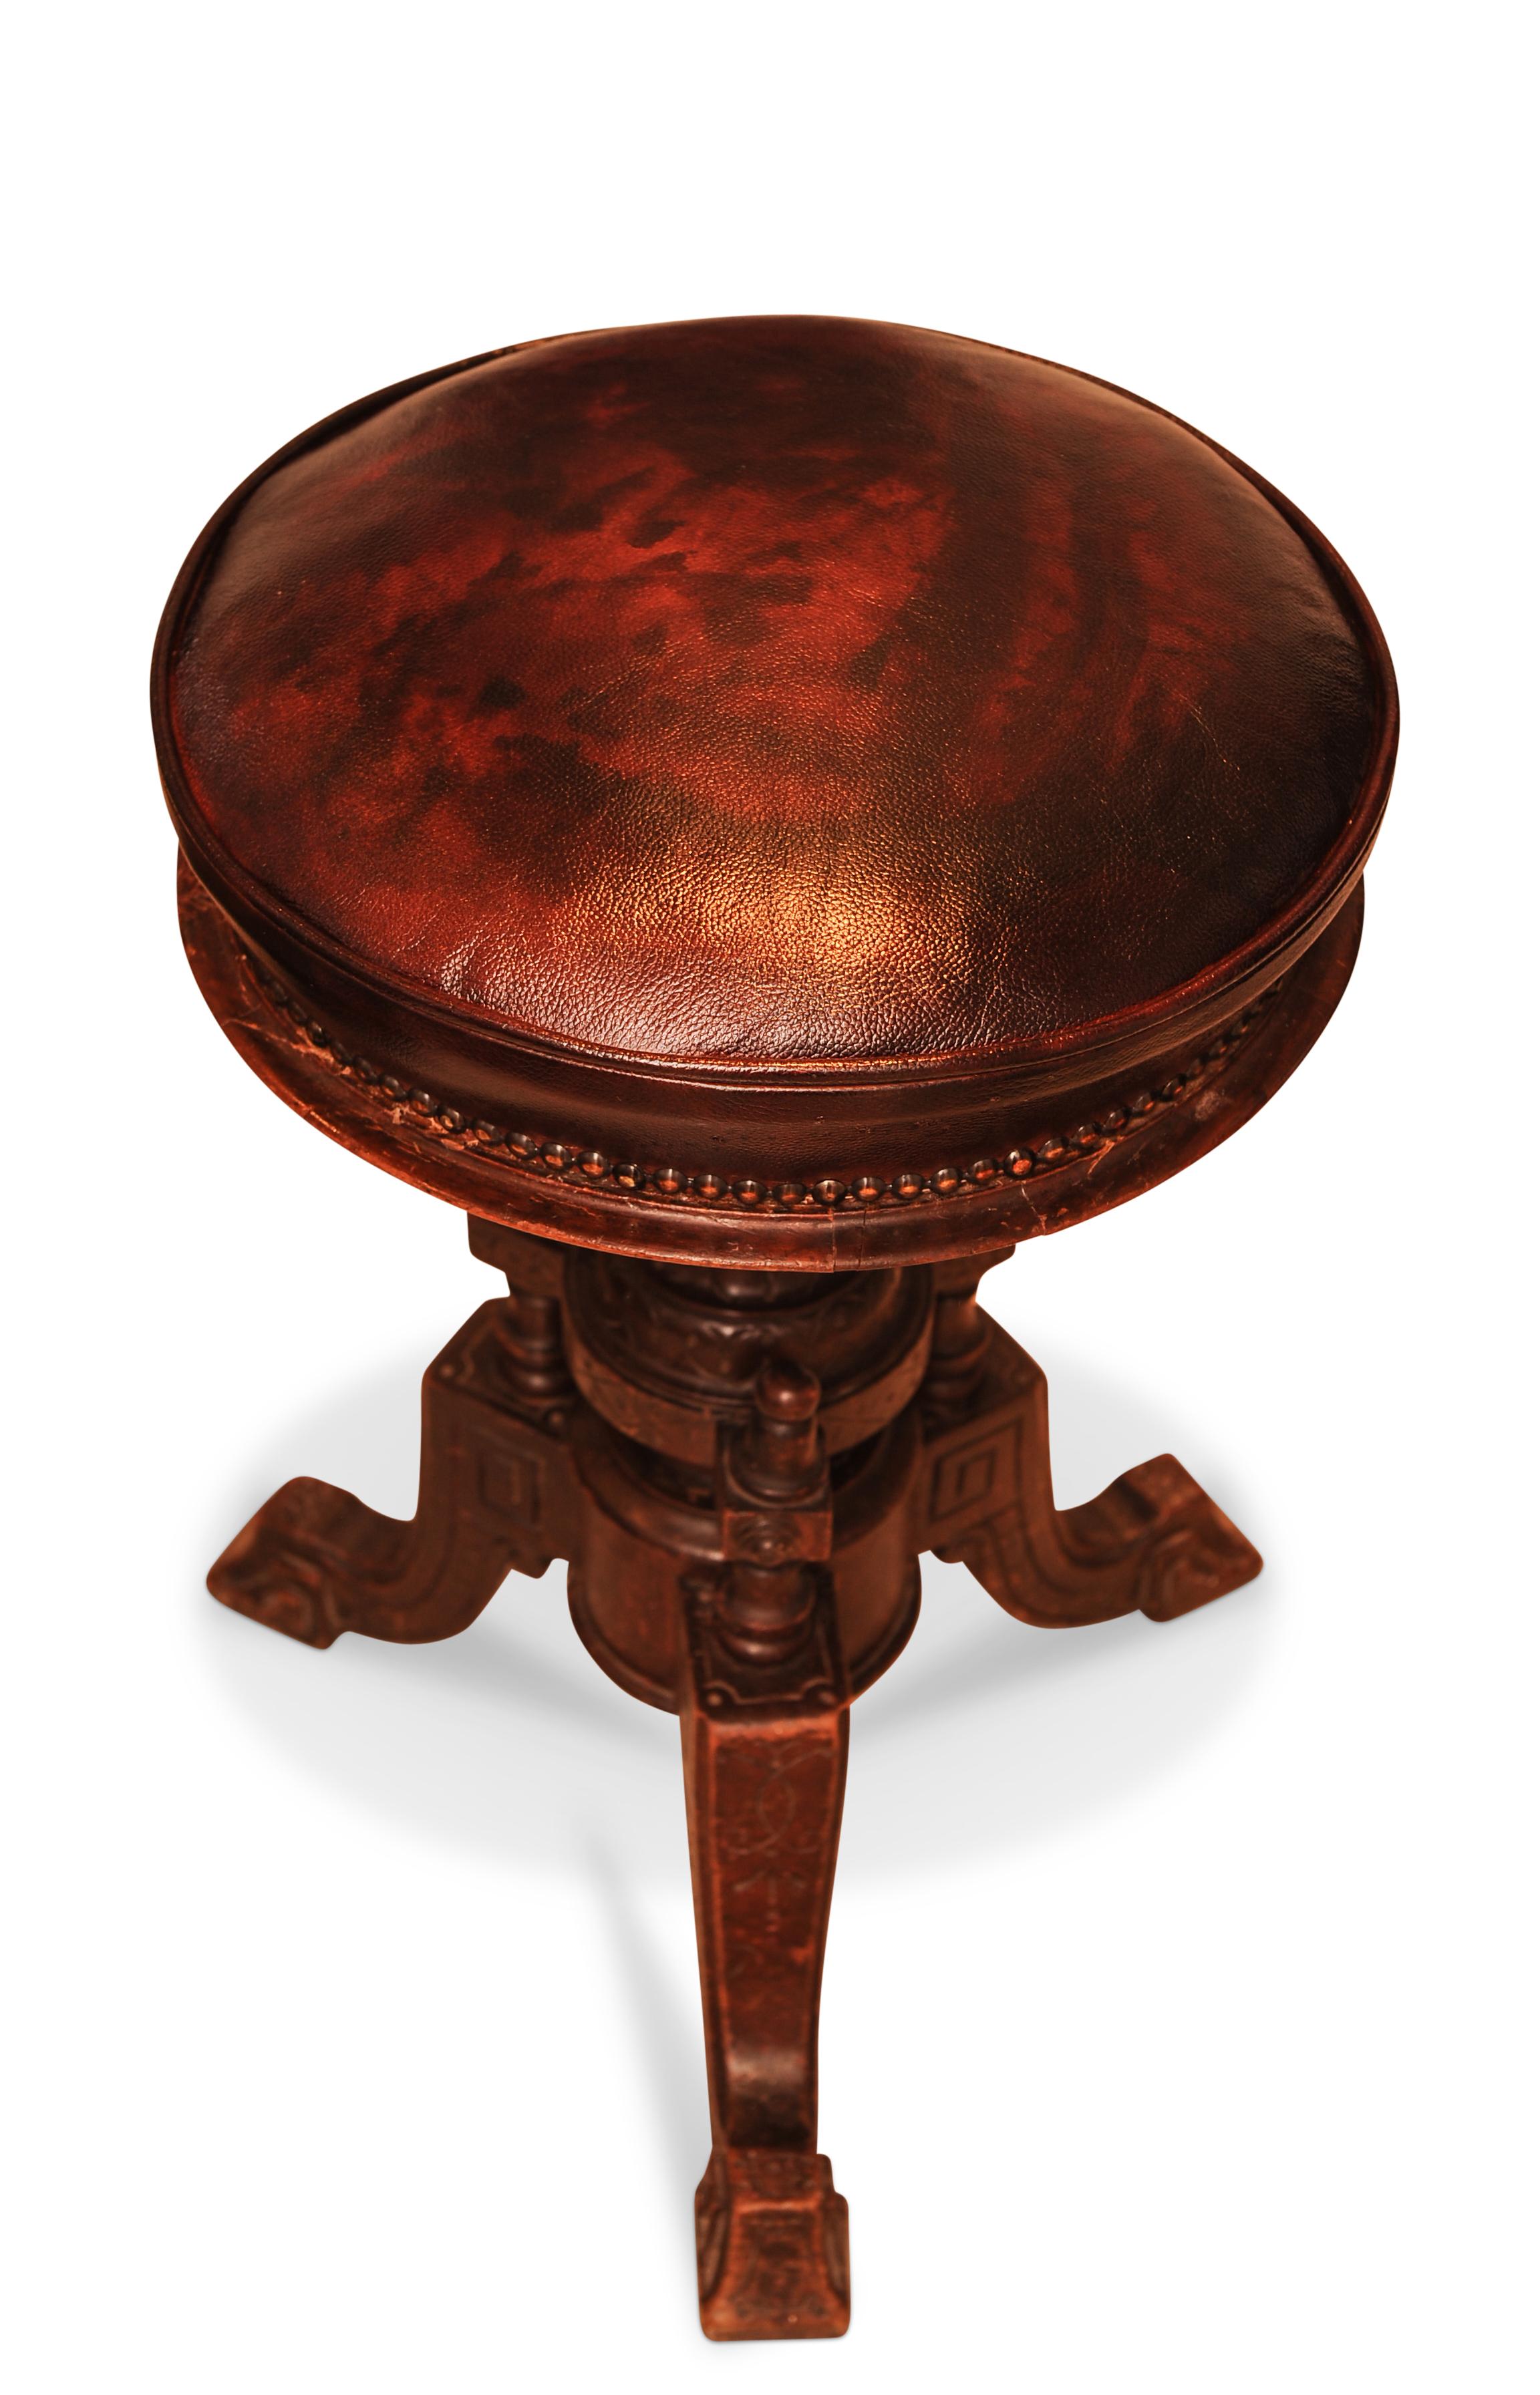 Elegant Classical Victorian Carved Wood Revolving Piano Stool With Brown Leather Seat Finished With Brass Studs Circa 1850's

Height to seat: 48cm - 57cm